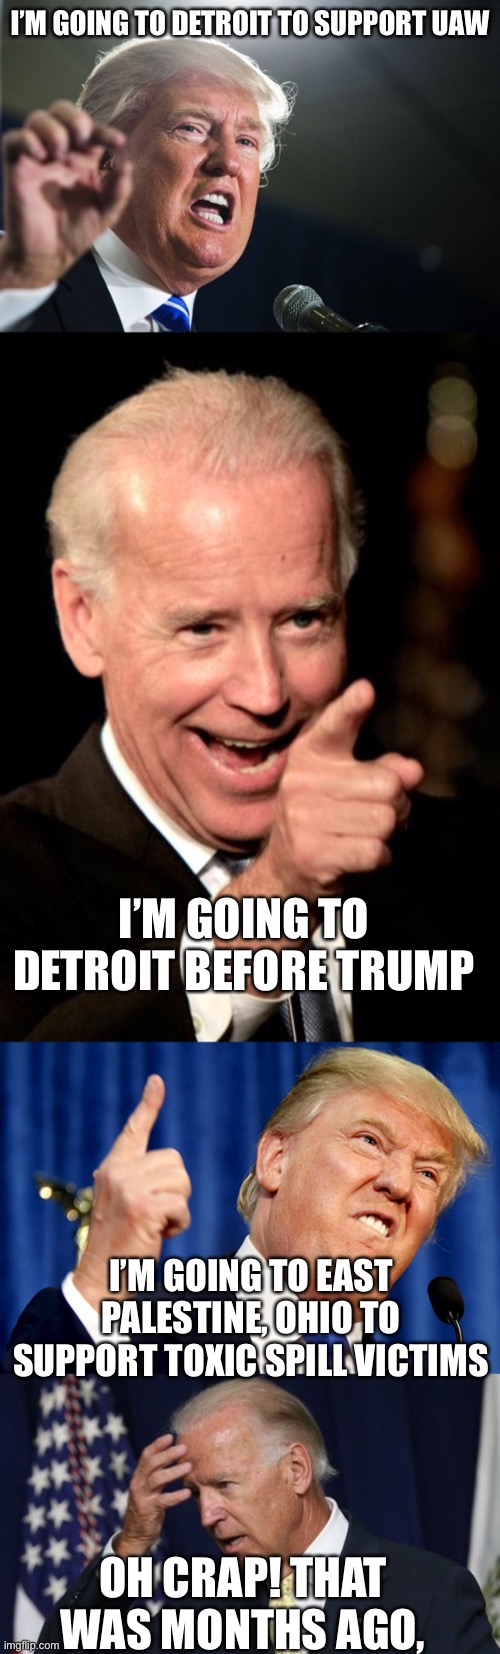 Joe promised to go to toxic train wreck site months ago. He never went. | I’M GOING TO DETROIT TO SUPPORT UAW; I’M GOING TO DETROIT BEFORE TRUMP; I’M GOING TO EAST PALESTINE, OHIO TO SUPPORT TOXIC SPILL VICTIMS; OH CRAP! THAT WAS MONTHS AGO, | image tagged in donald trump,joe biden worries,east palestine,toxic spill | made w/ Imgflip meme maker